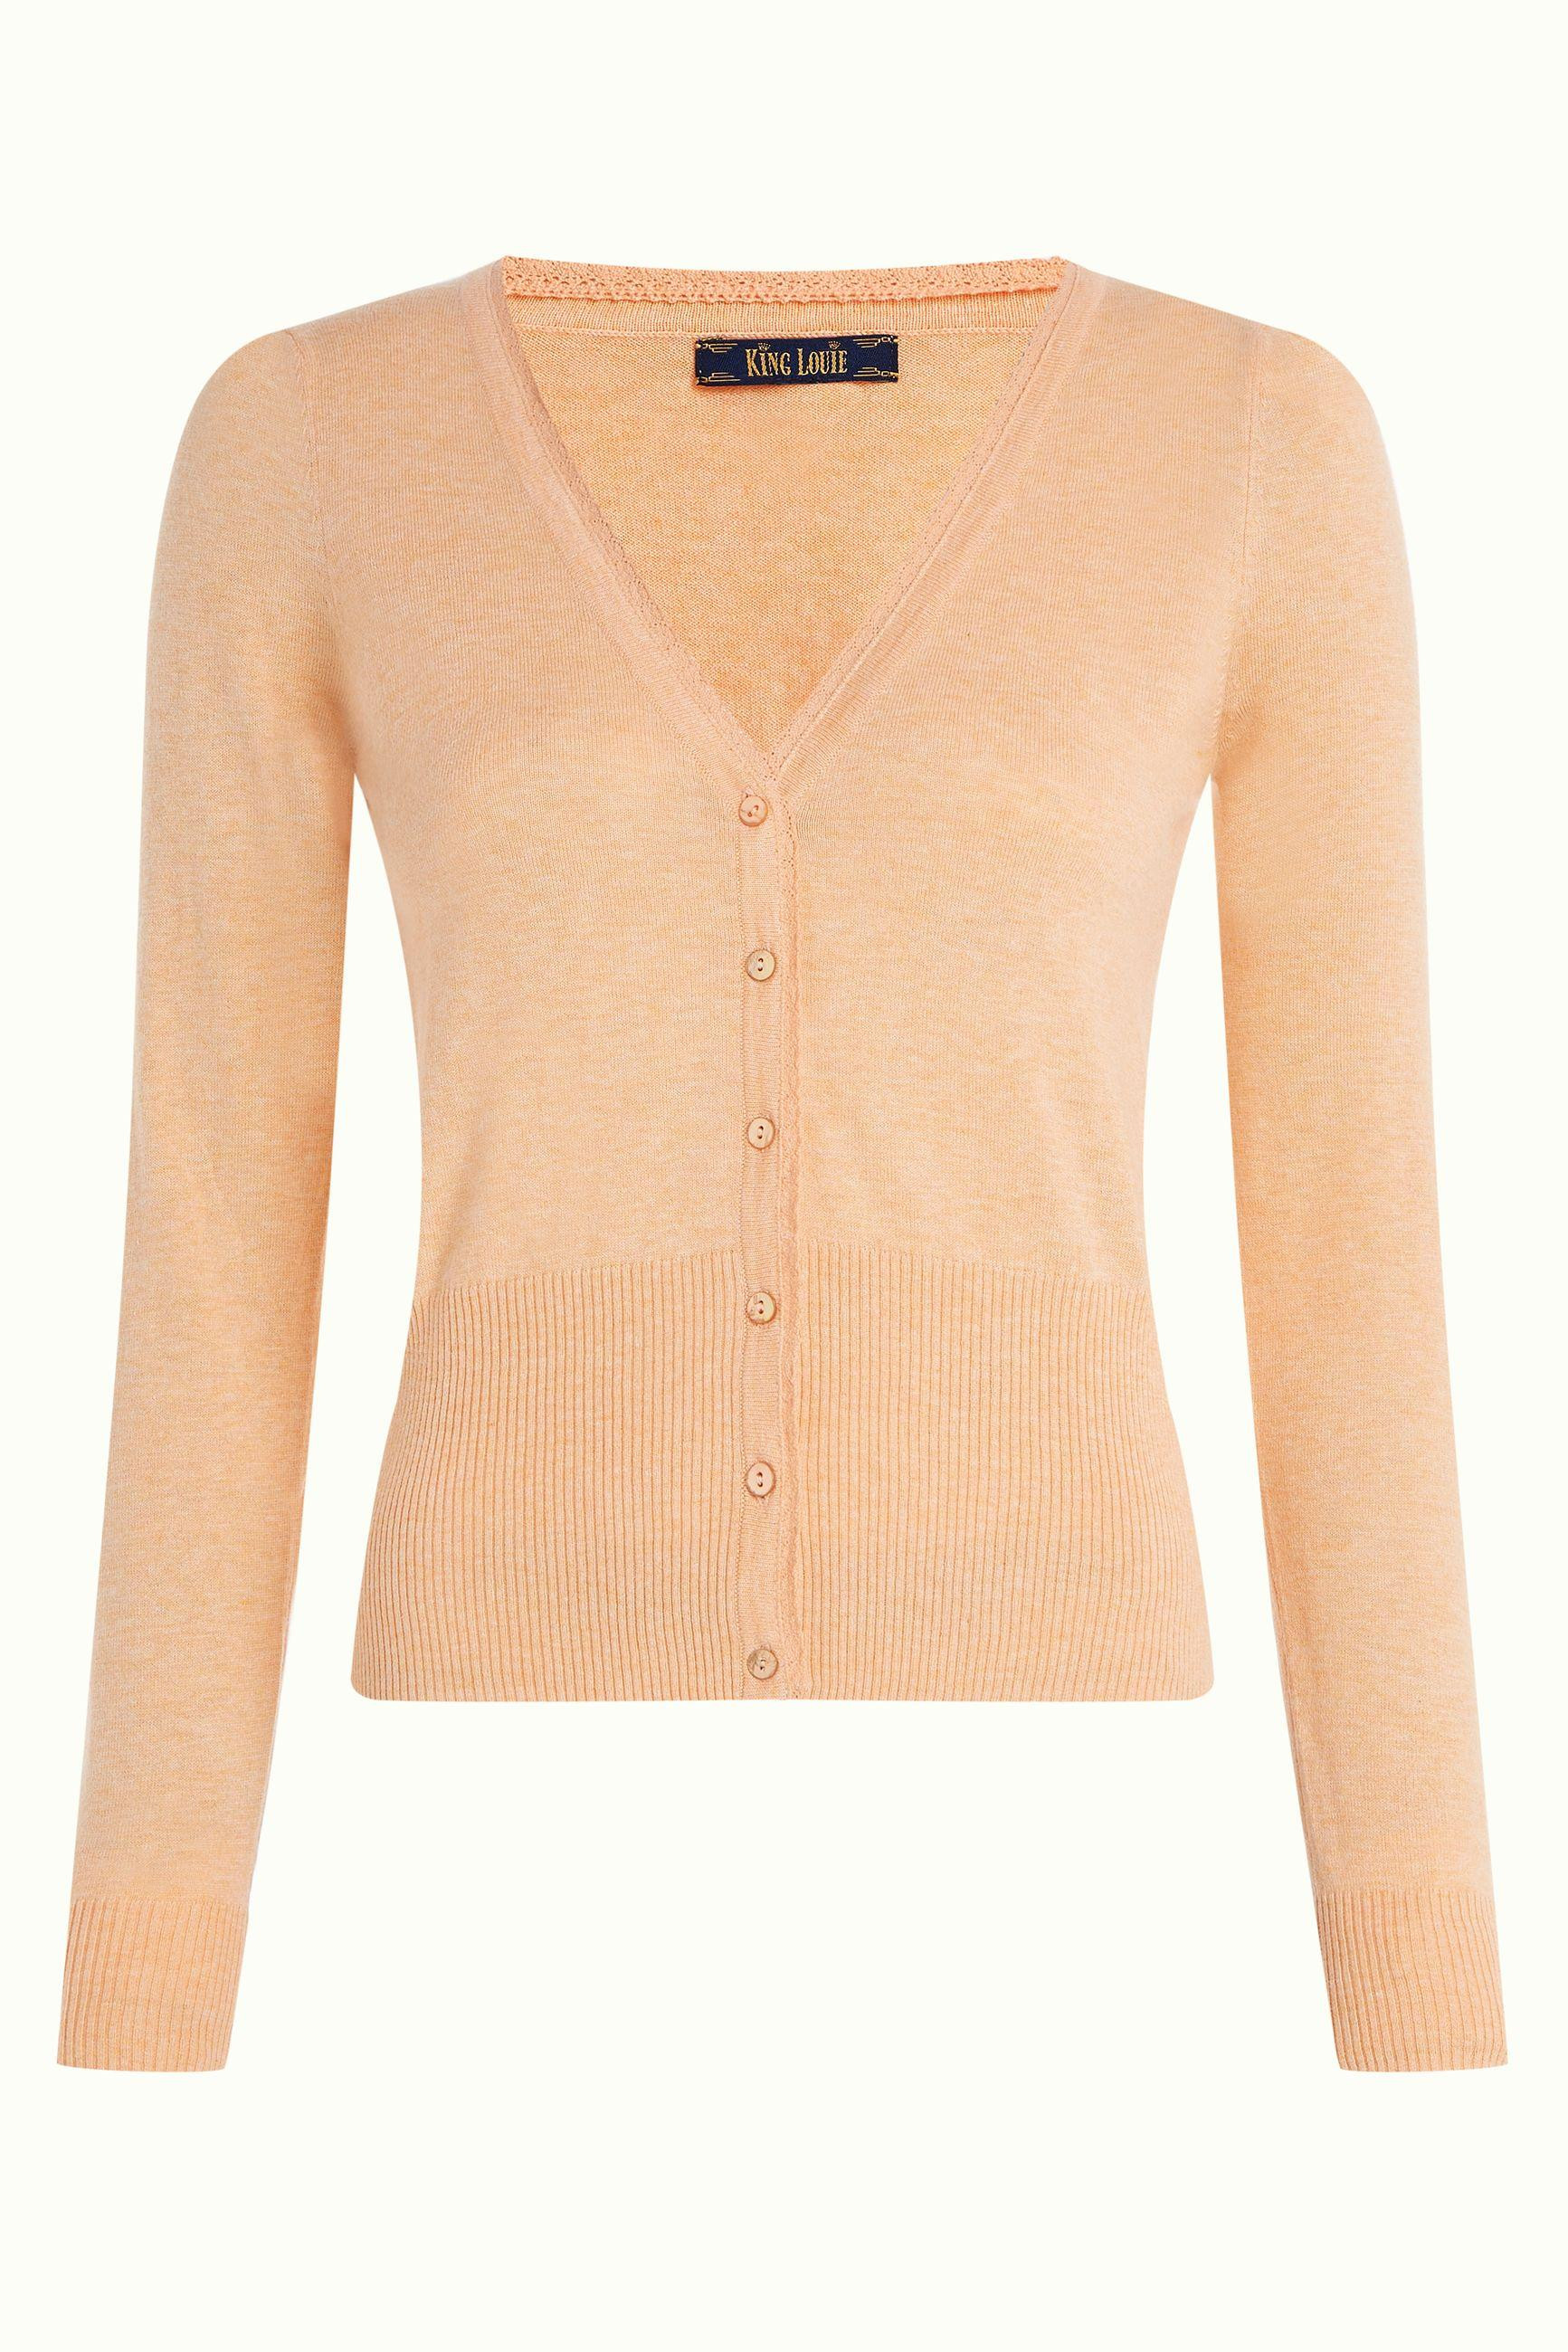 King Louie Cardi V Cocoon, Farbe: Creampuff